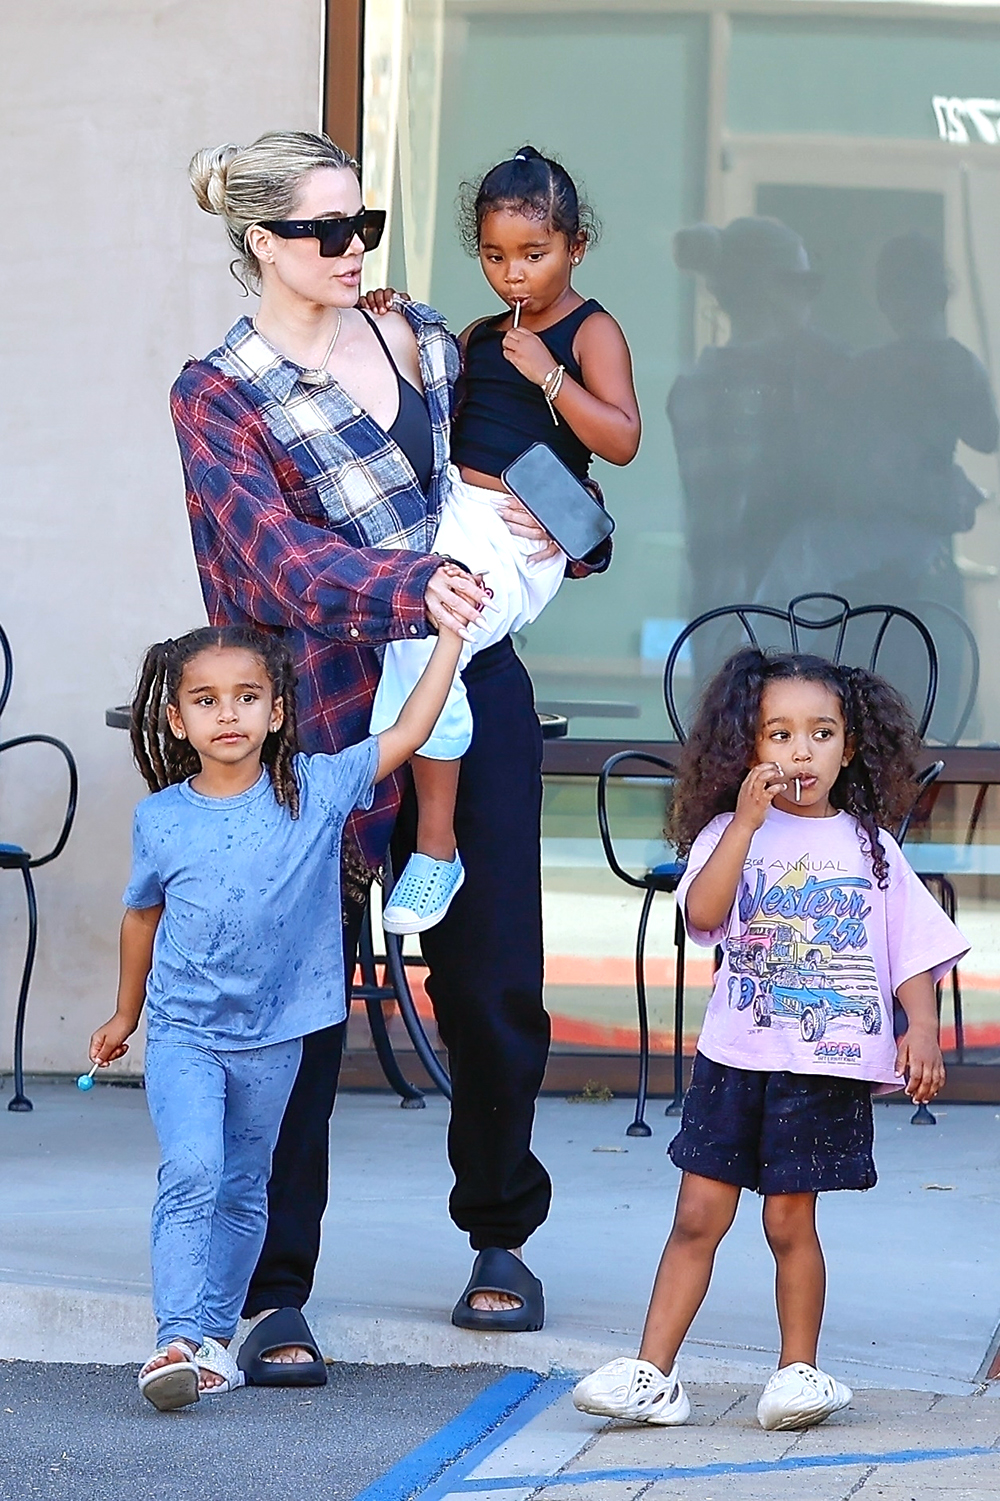 Kim’s Daughter Chicago, 5, & Khloe’s Daughter True, 4, Are So Cute Dressed In Sunglasses & Cowboy Boots